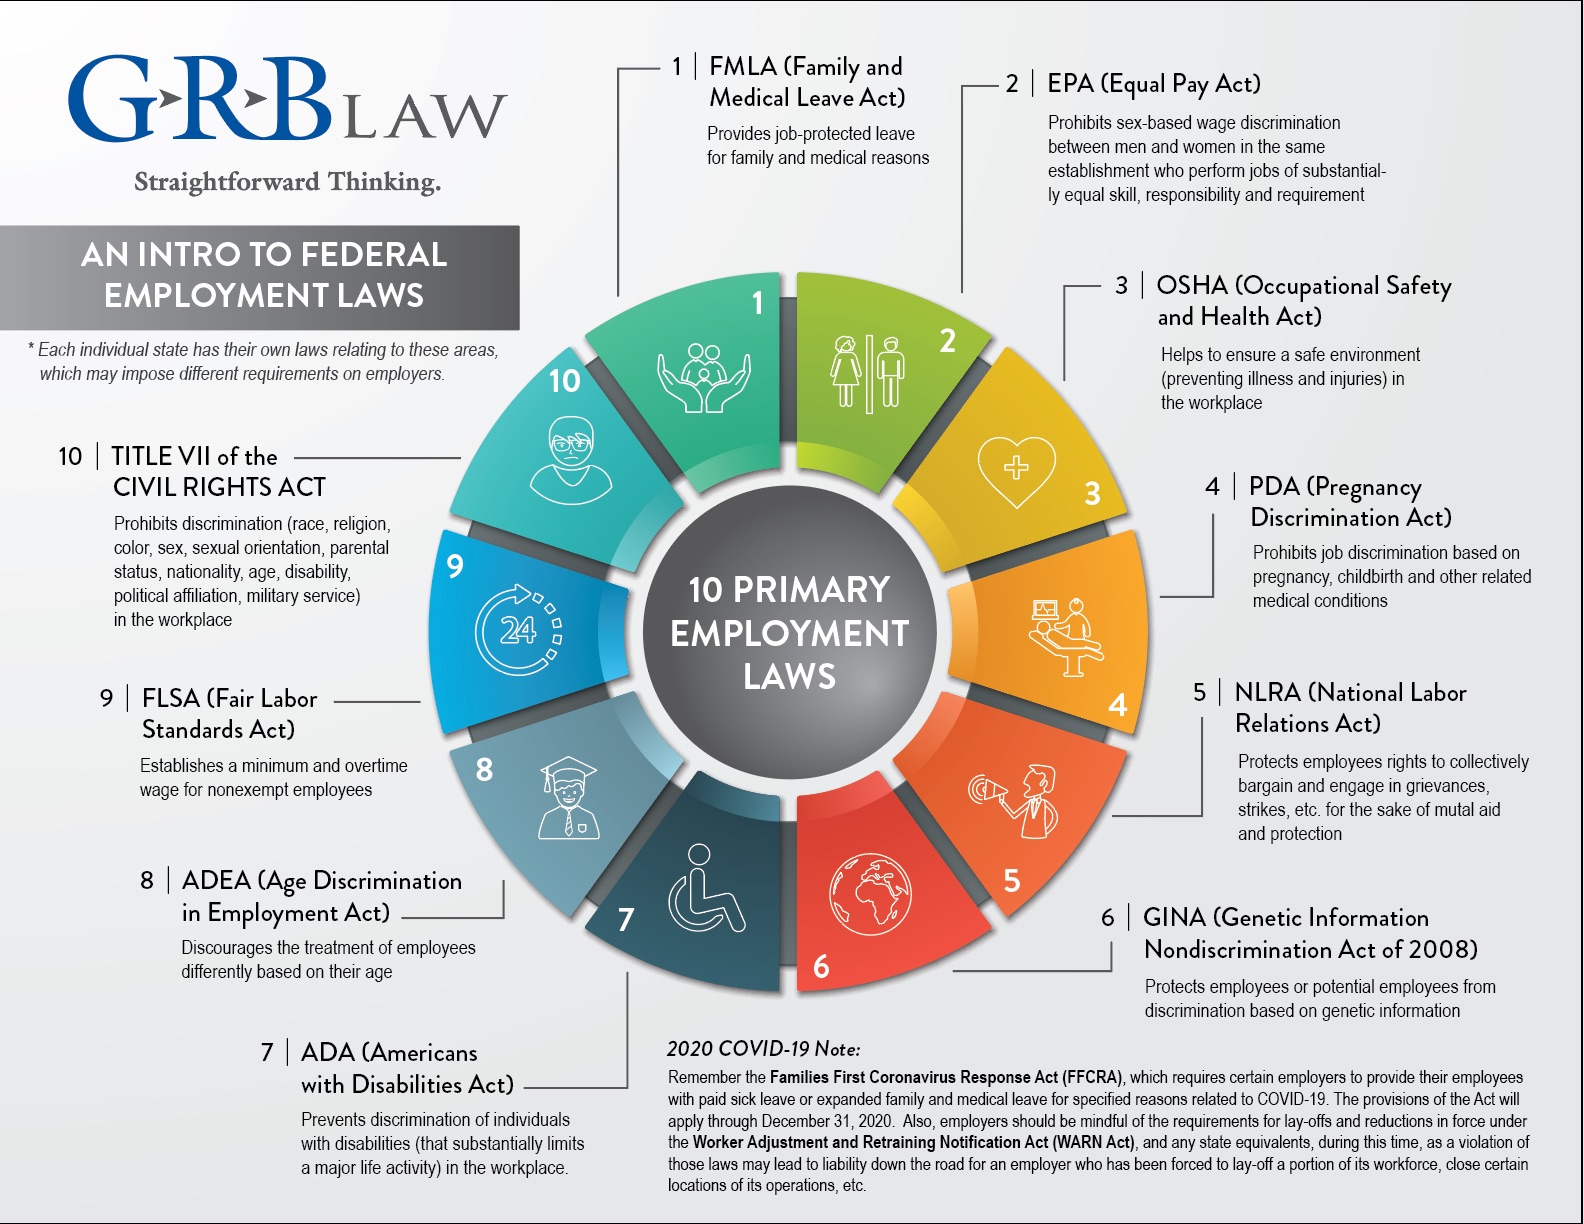 Image of GRB Law's Federal Employment Laws infographic